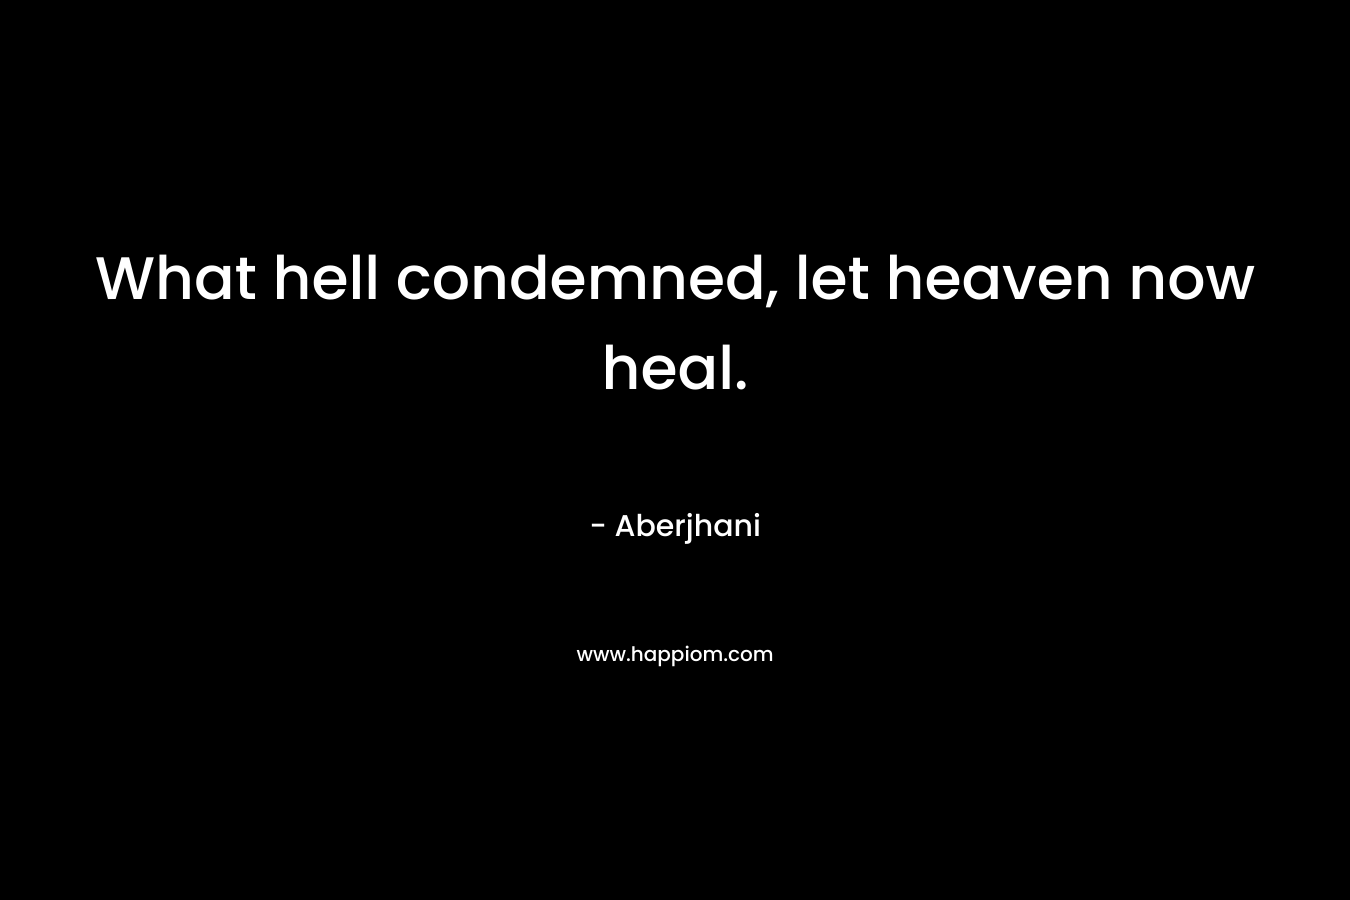 What hell condemned, let heaven now heal.